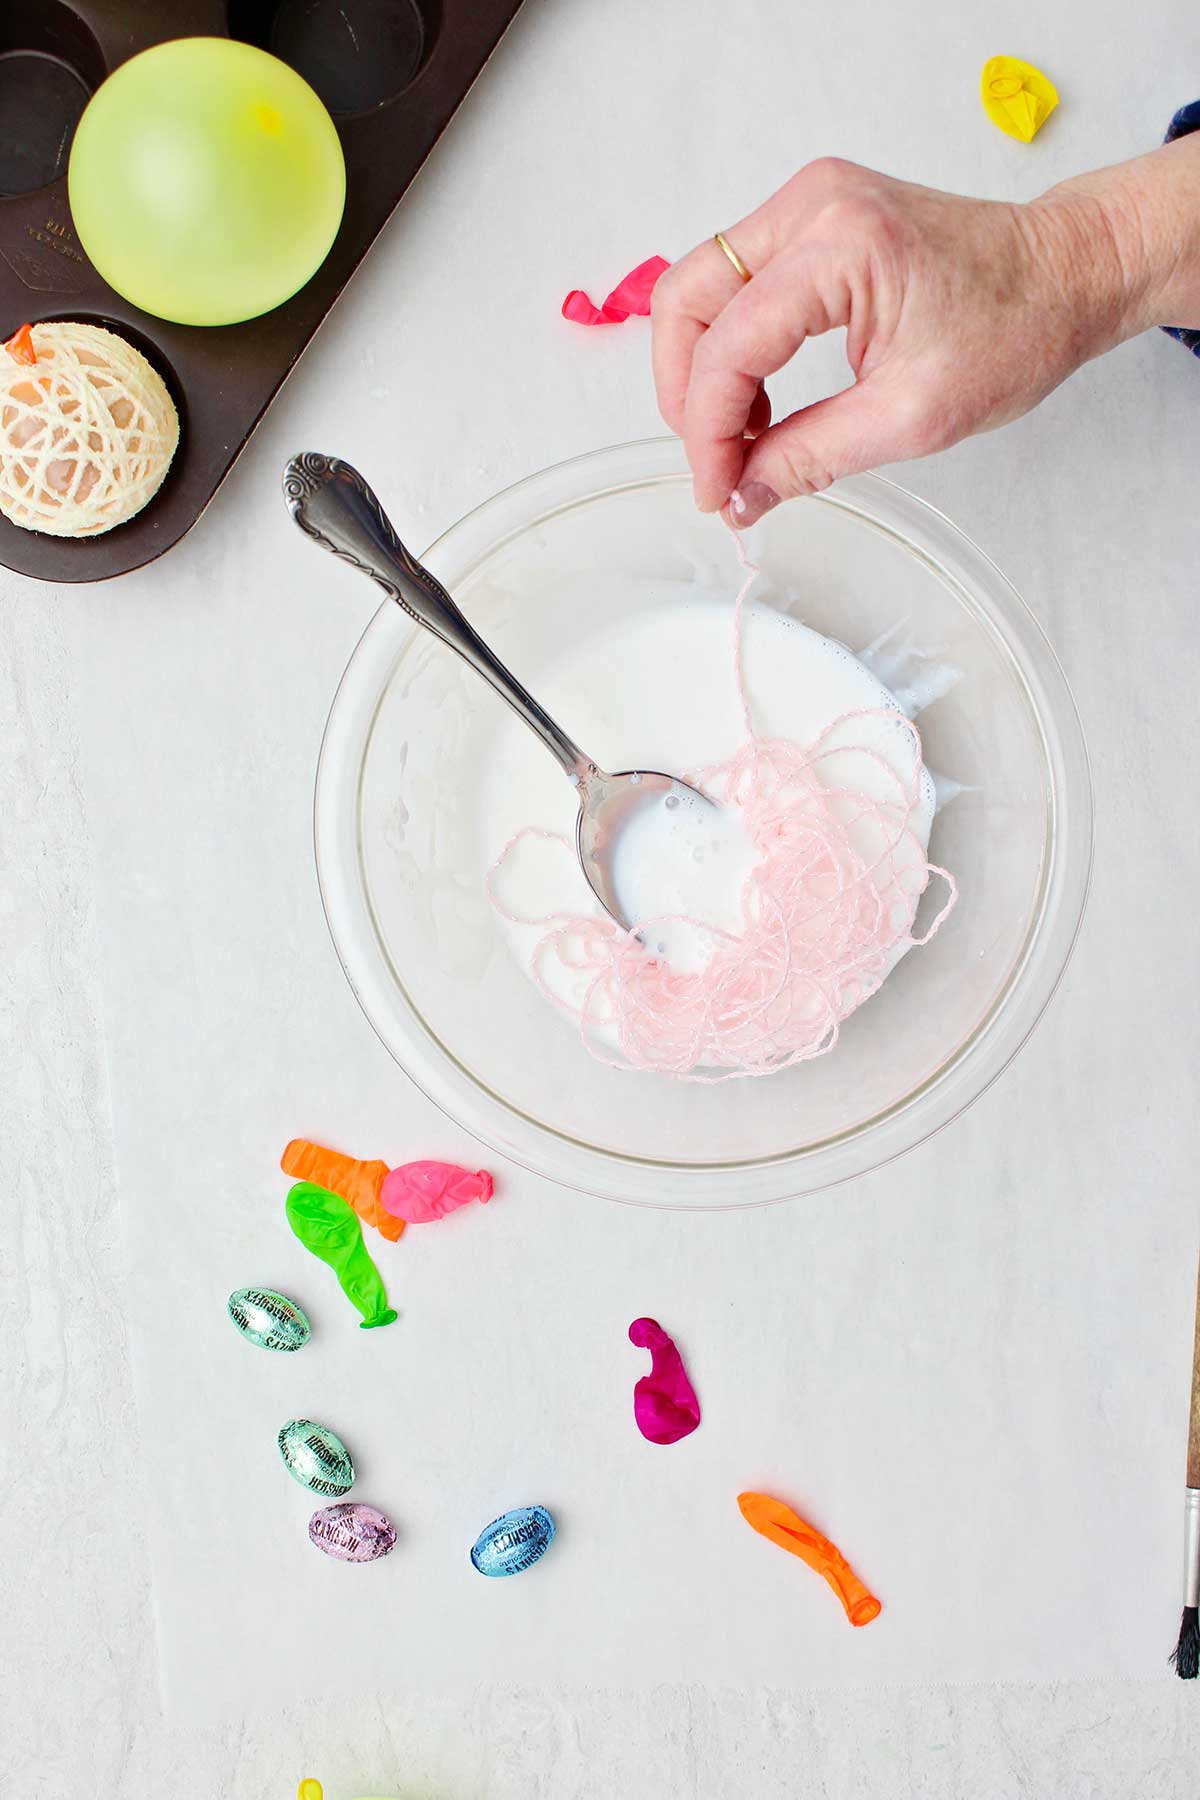 Hand dipping pink yarn in a bowl of white glue with other supplies near by.